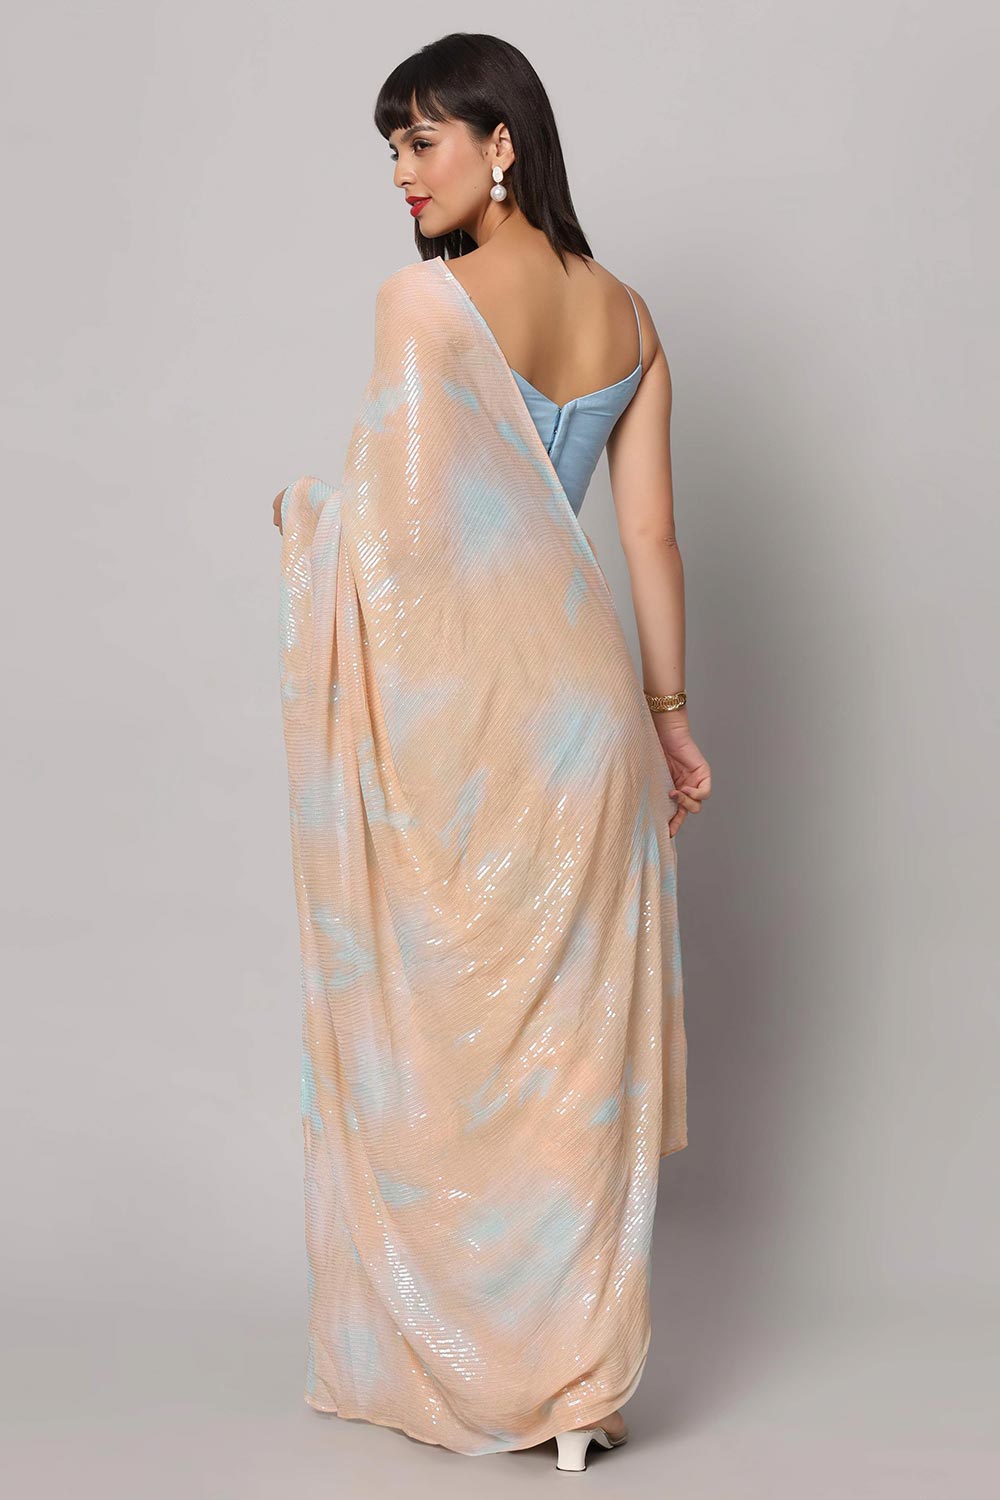 Shop Taylor Pink & Blue Tie-Dye Georgette  with Sequins One Minute Saree at best offer at our  Store - One Minute Saree